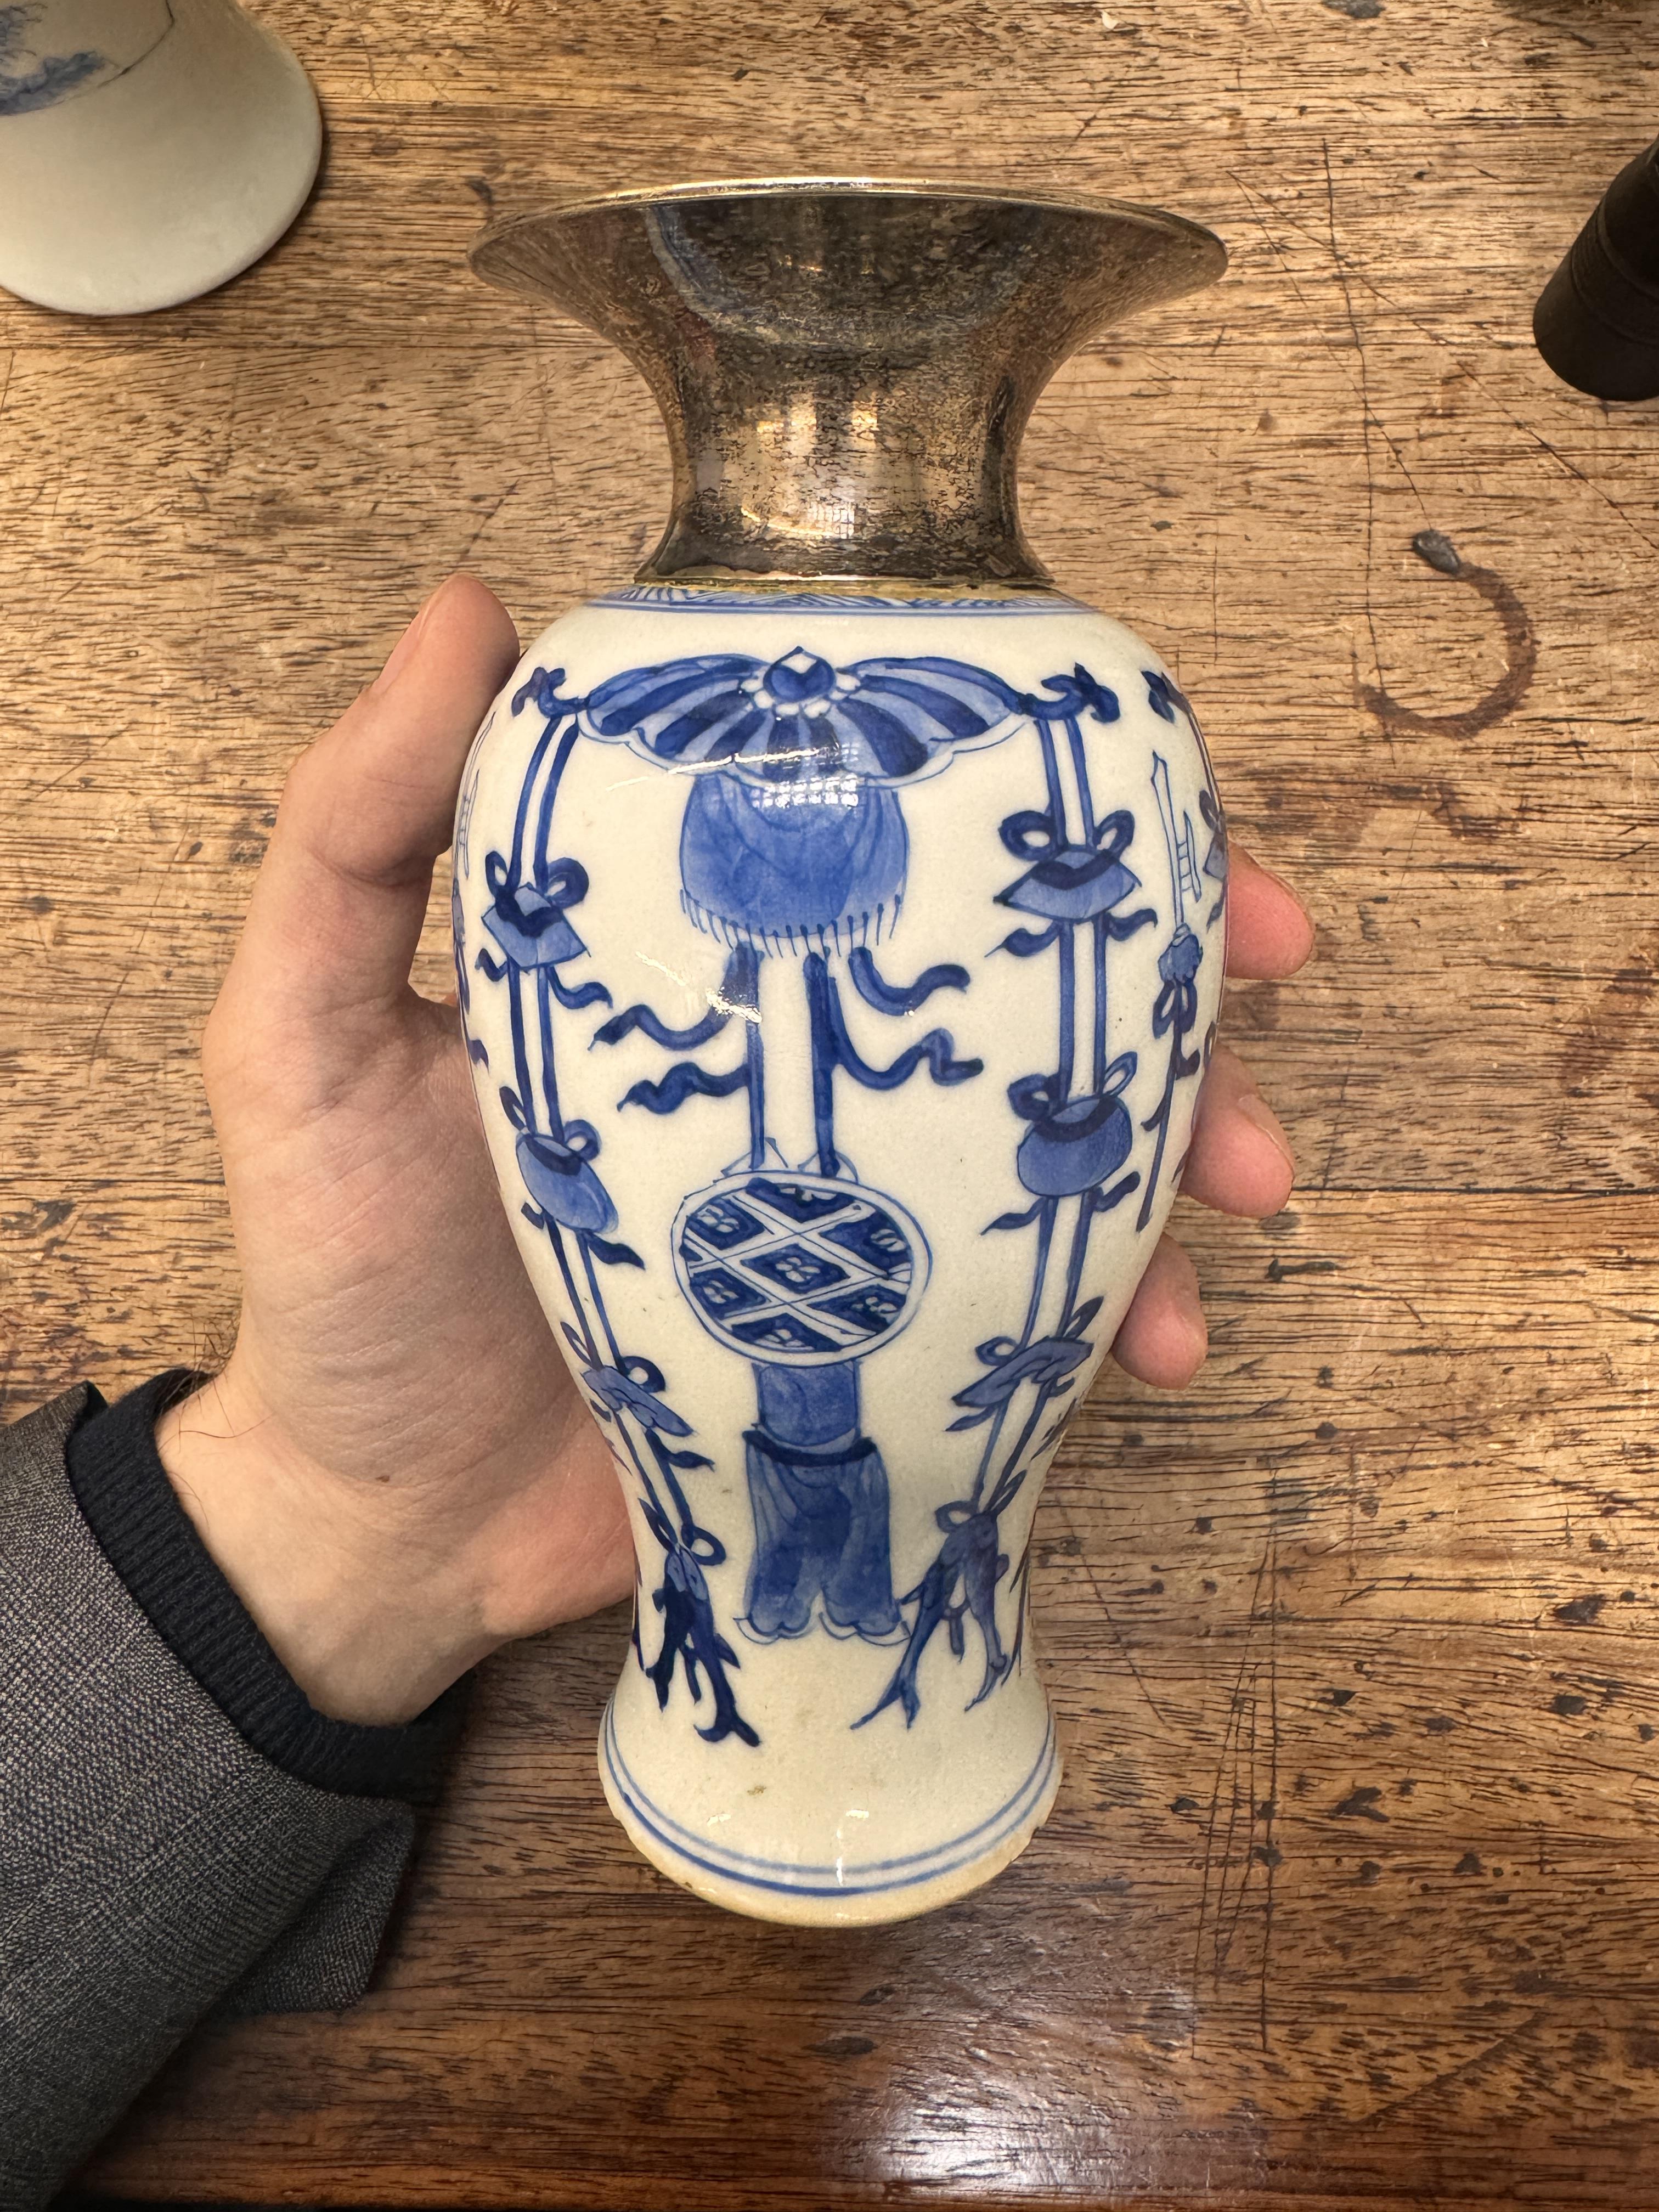 A CHINESE BLUE AND WHITE VASE 清康熙 青花雙魚紋瓶 - Image 9 of 17